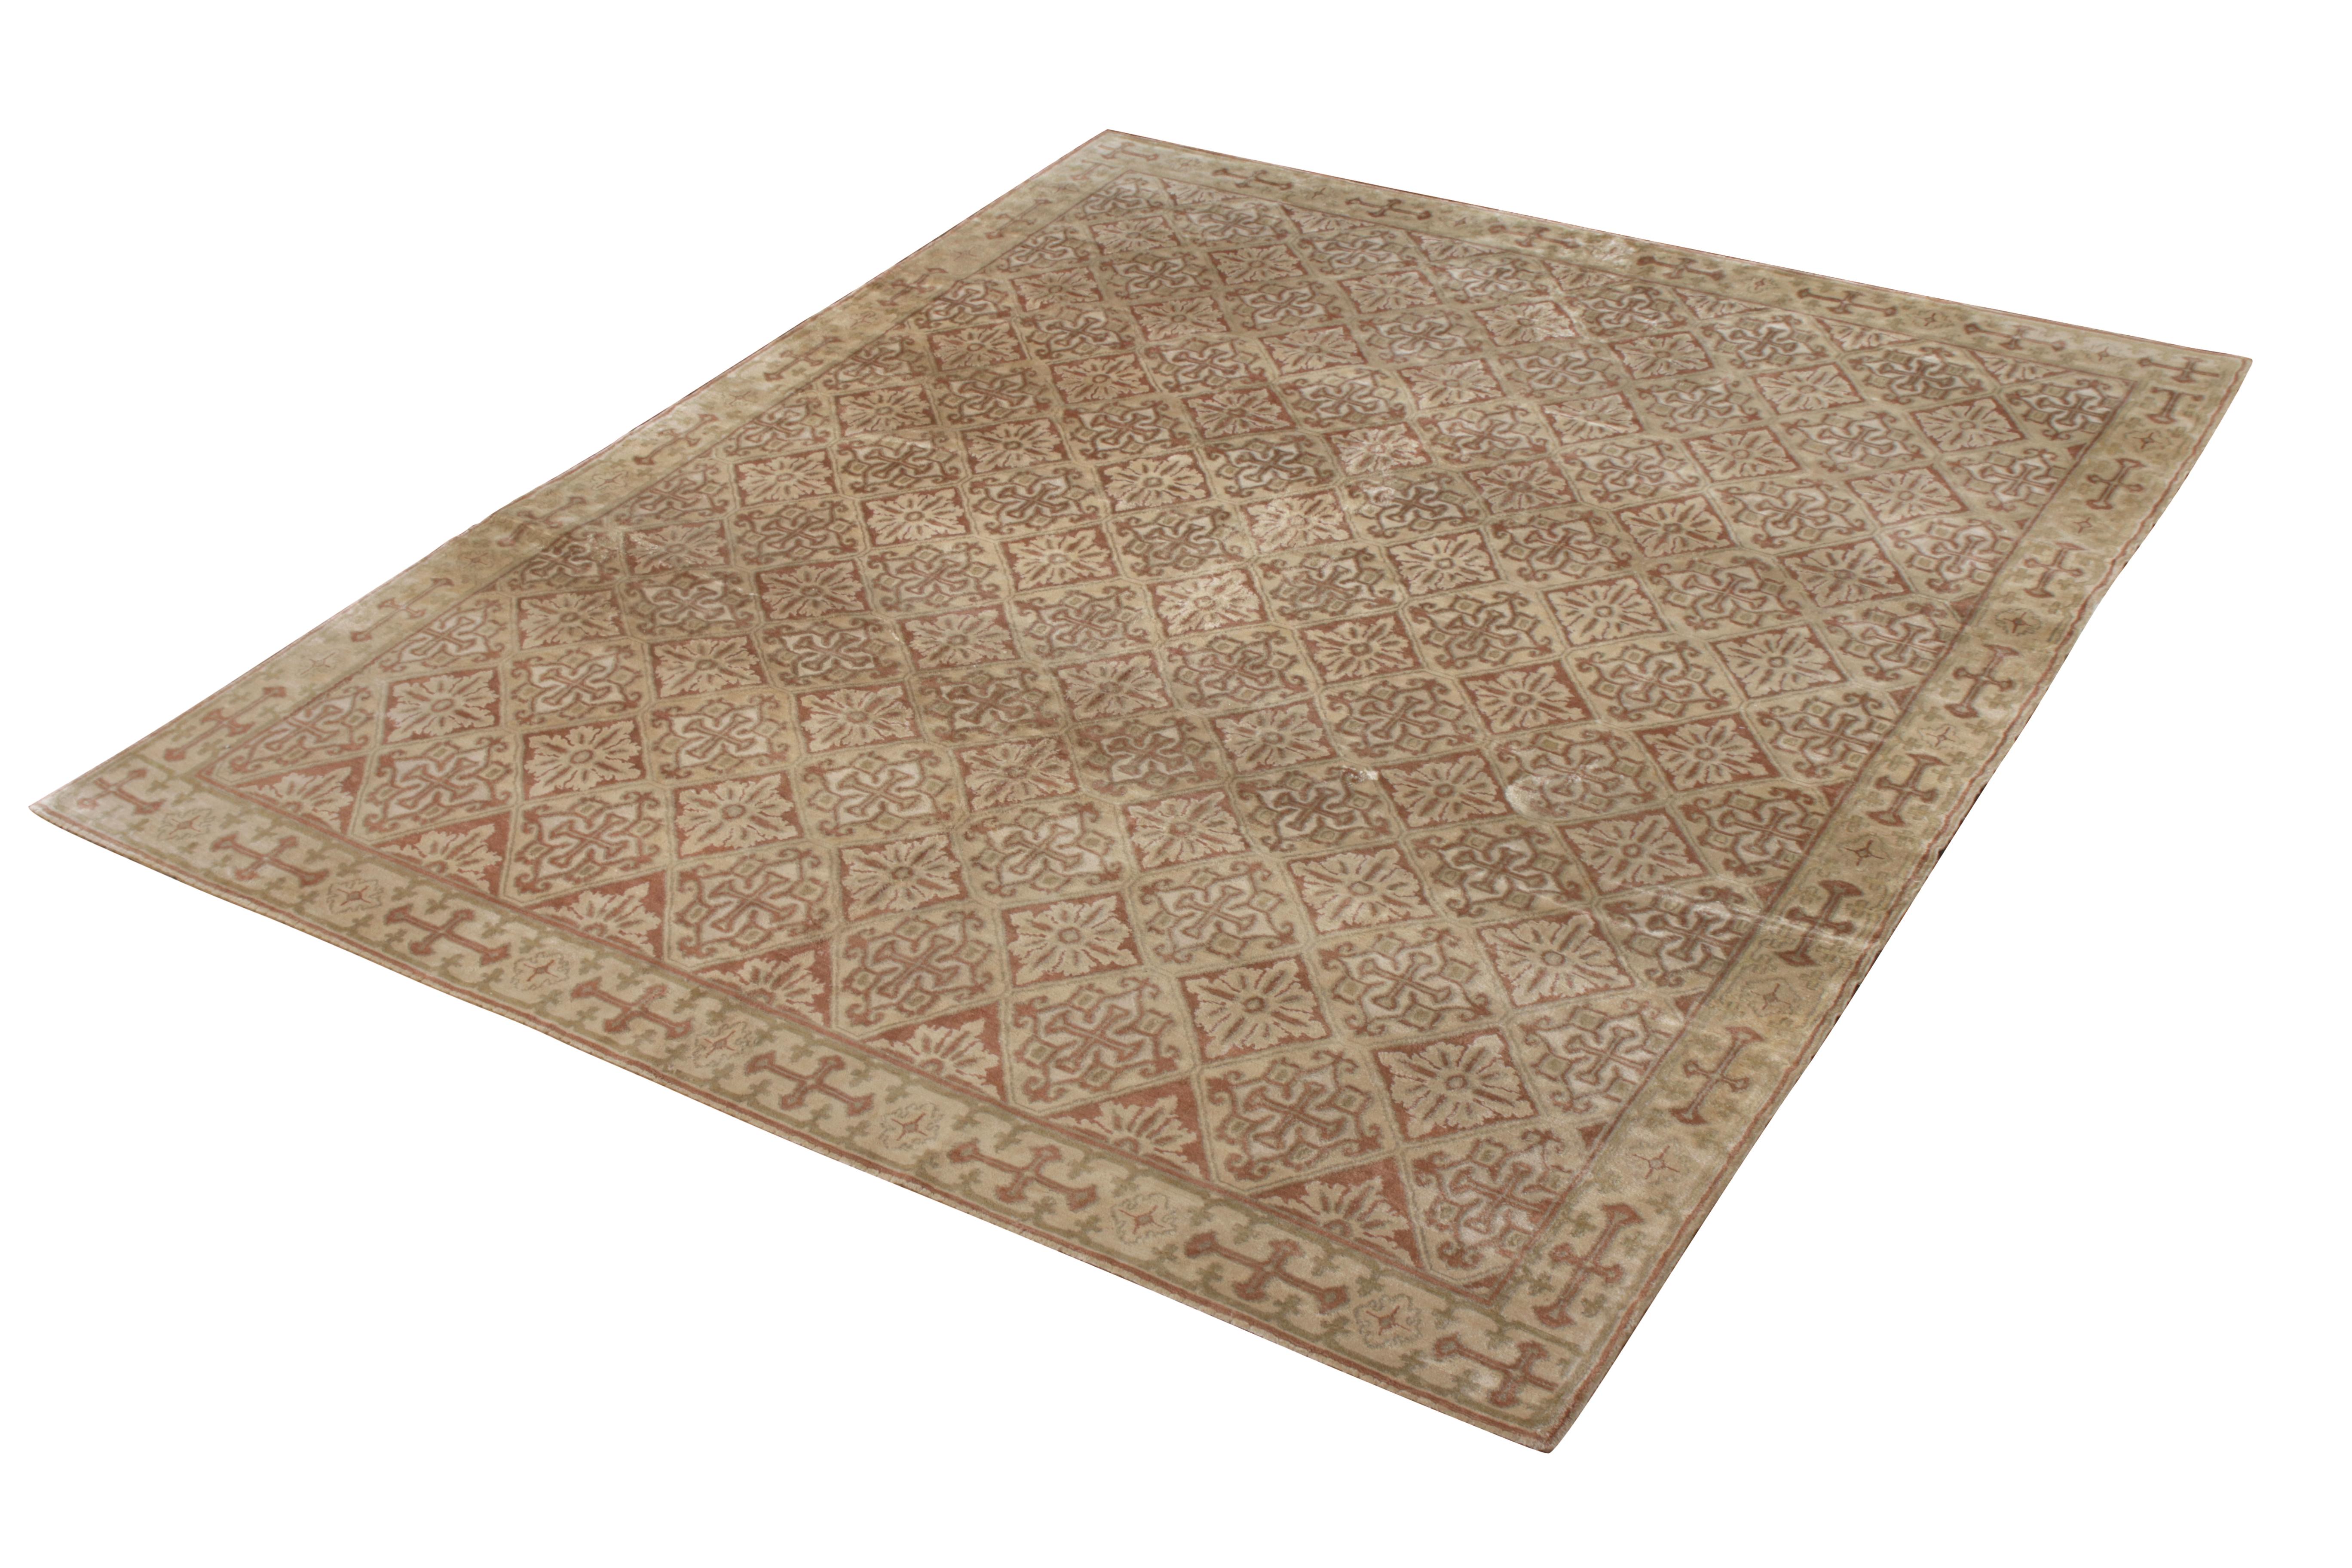 Hand knotted in a unique blend of all natural silk and wool, this transitional 8 x 10 rug is from the European rug collection by Rug & Kilim, inspired by a distinctive European Art Deco rug style like that in this rich beige brown piece.


On the